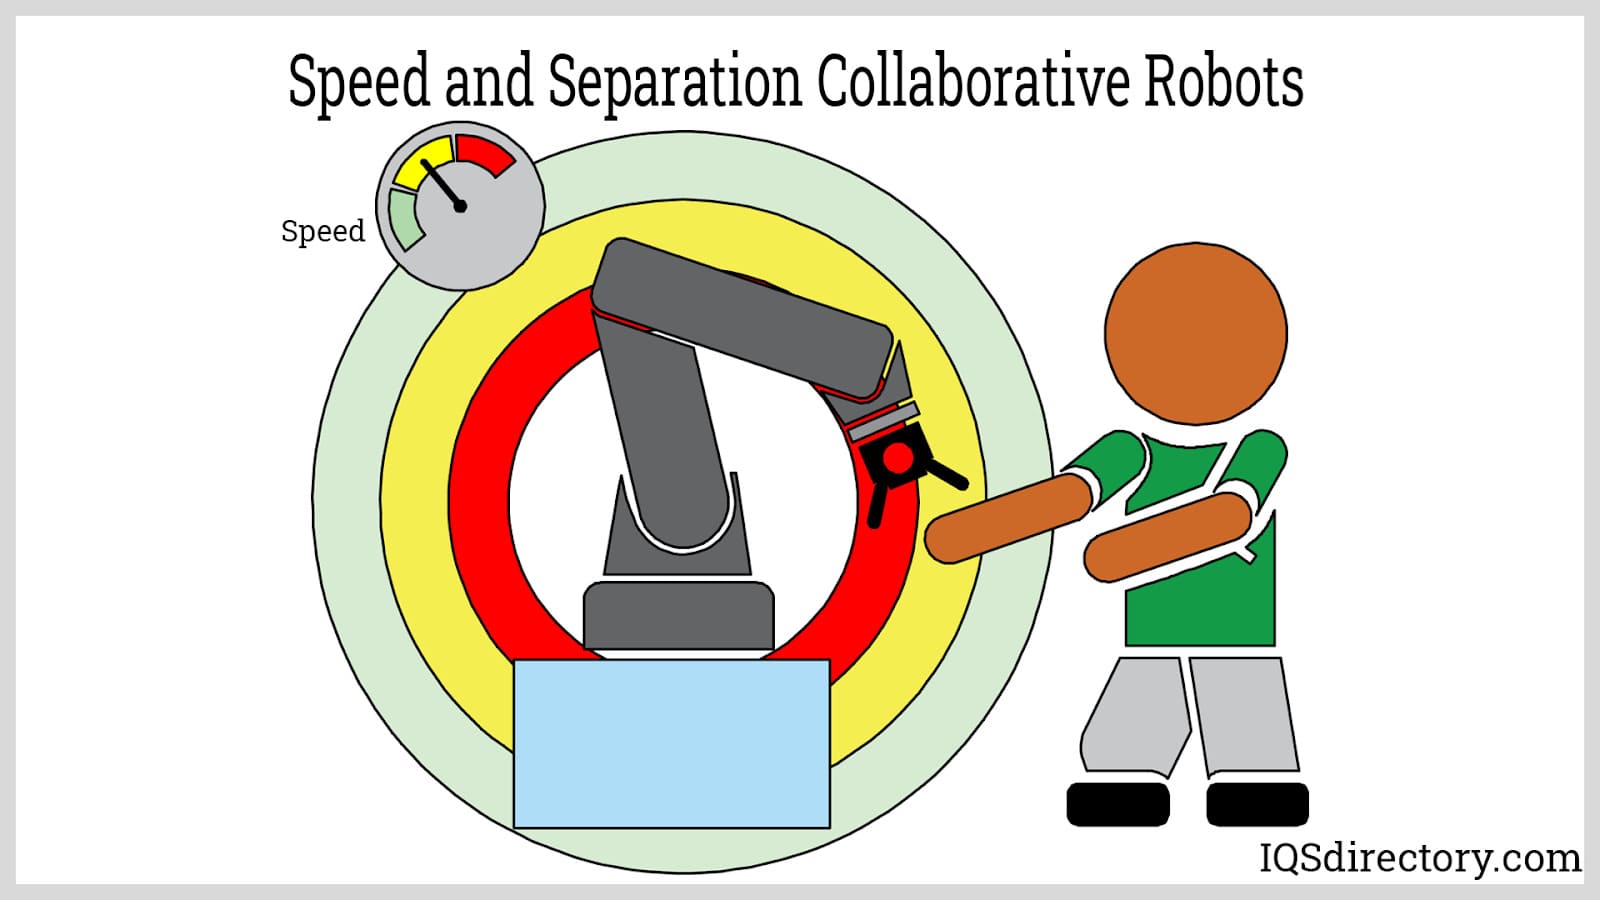 Speed and Separation Collaborative Robots